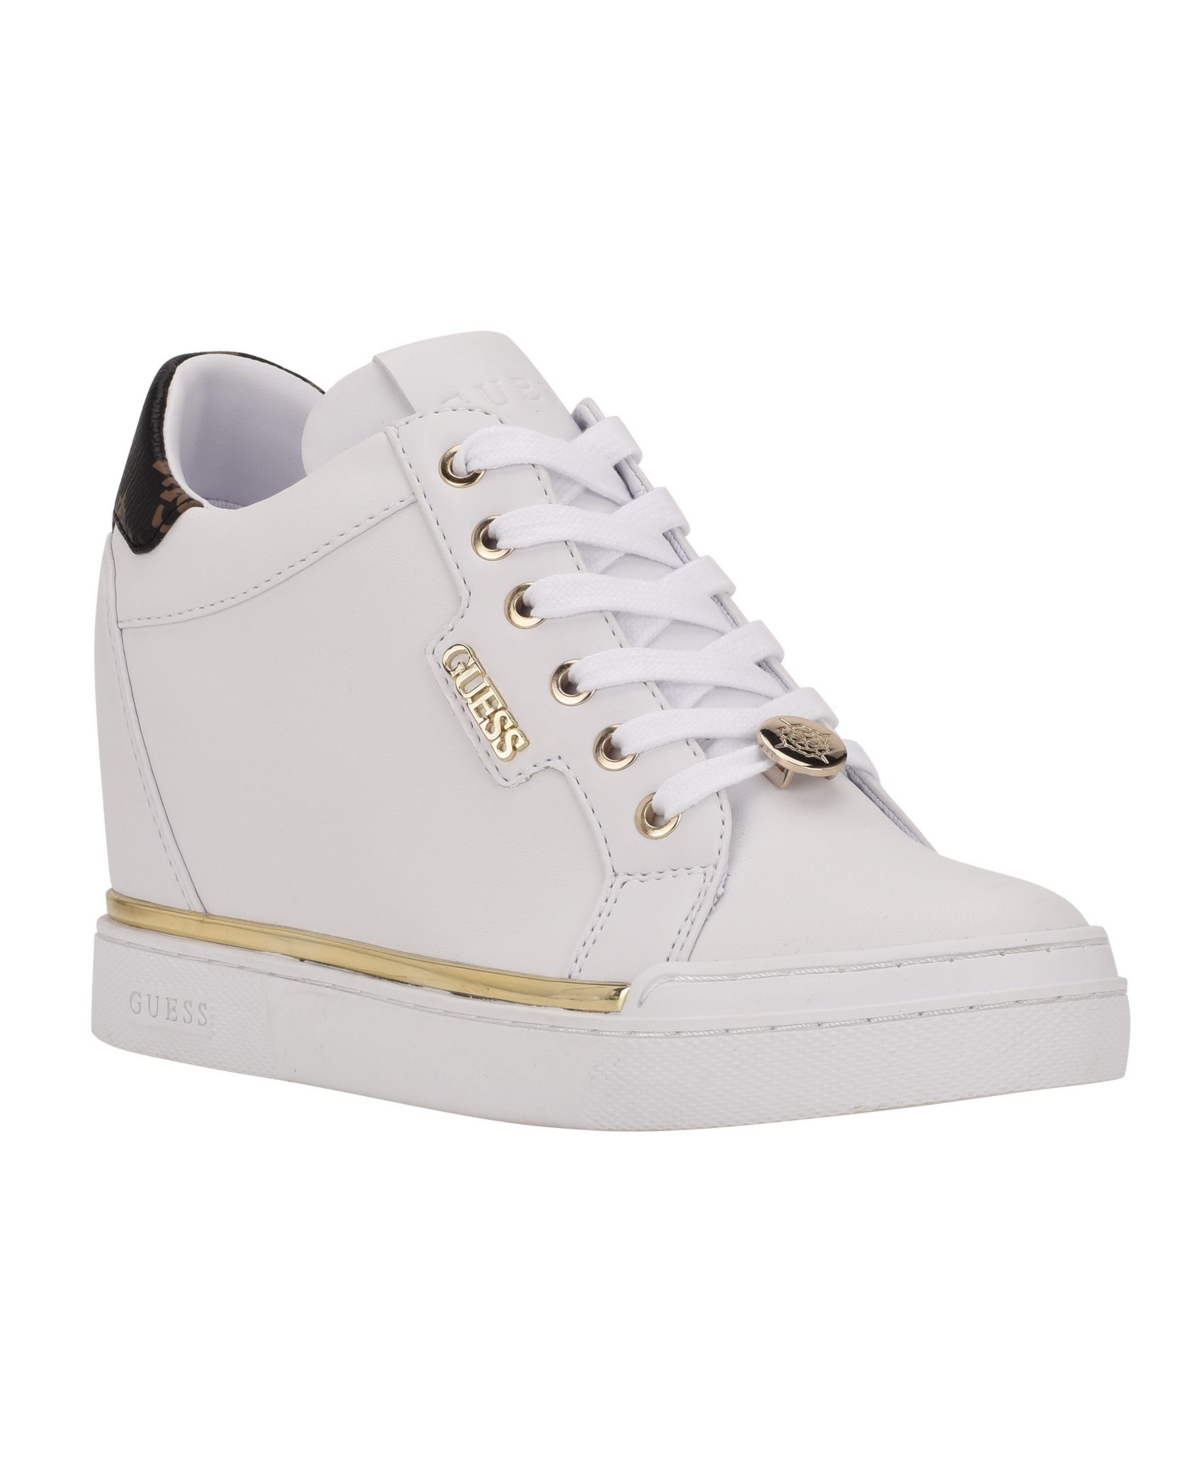 GUESS WOMEN'S FASTER WEDGE SNEAKERS